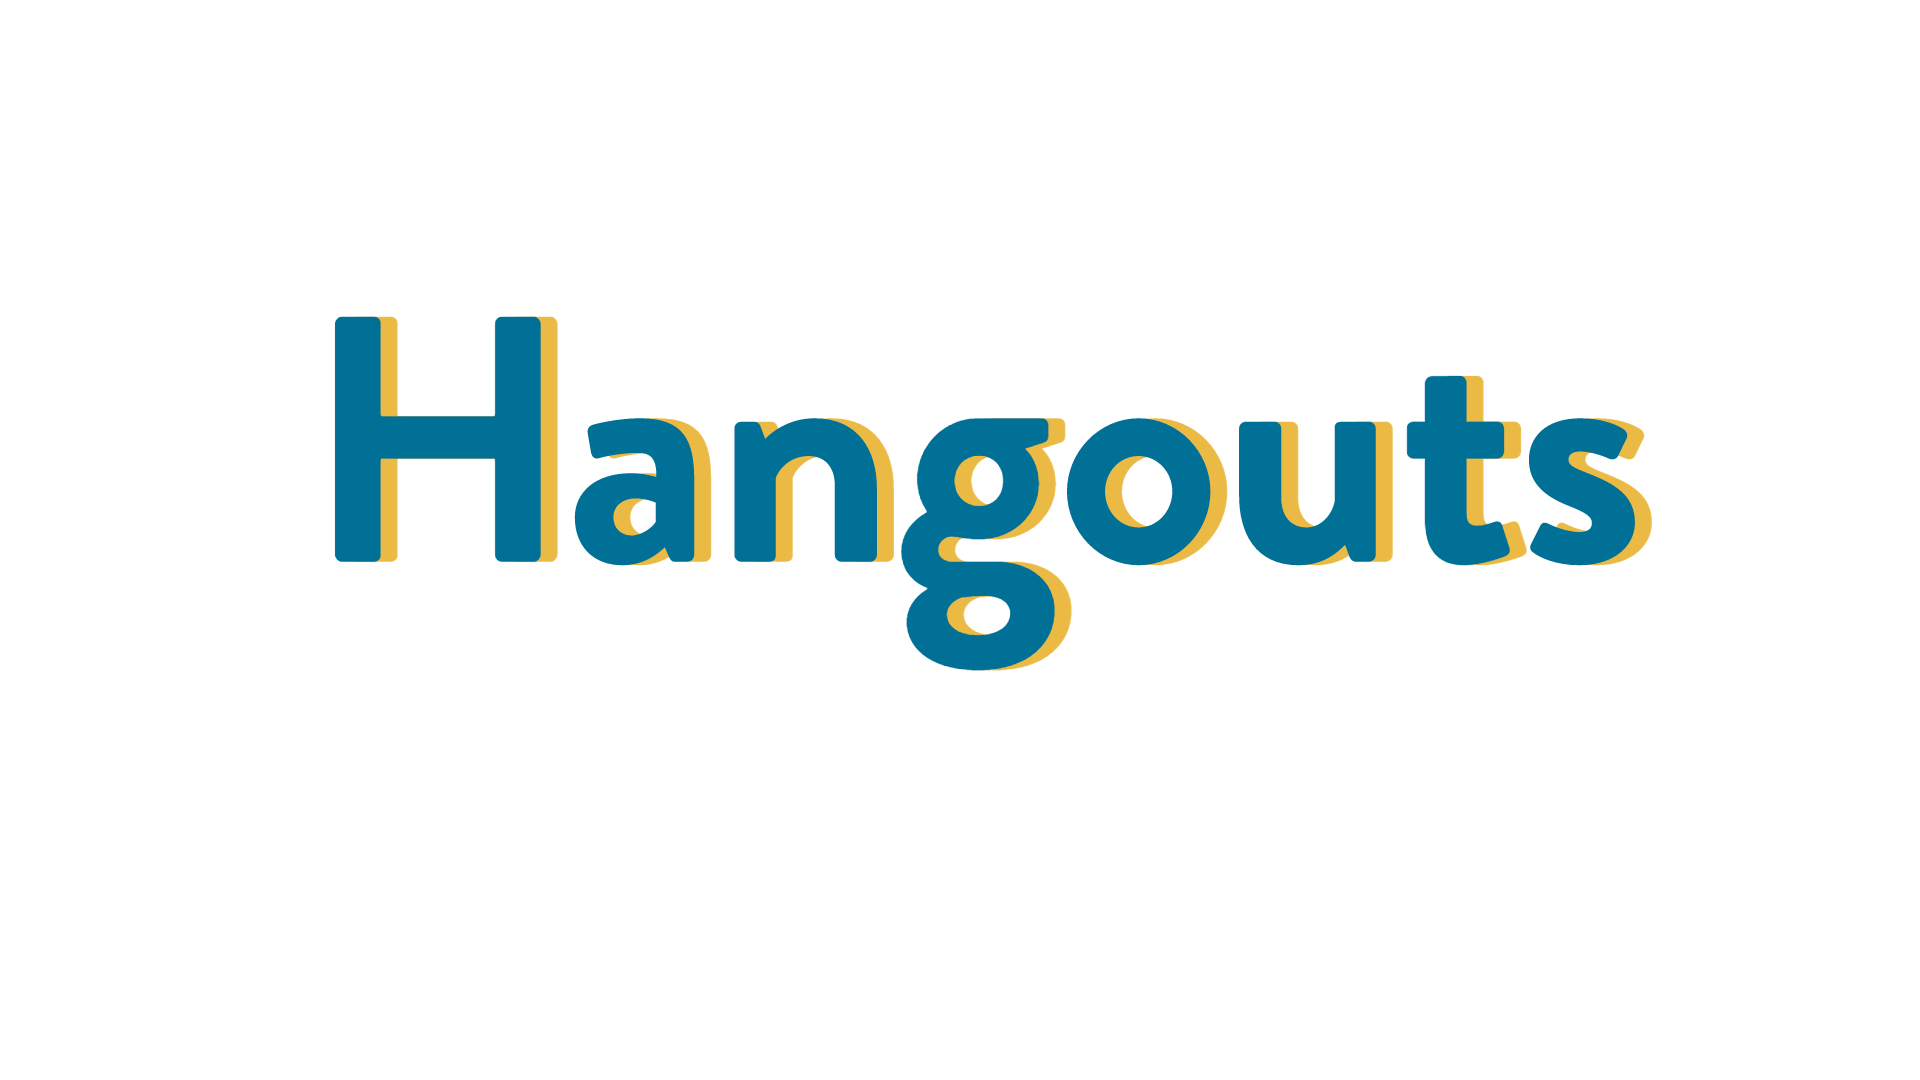 The word "Hangouts" on a blank background